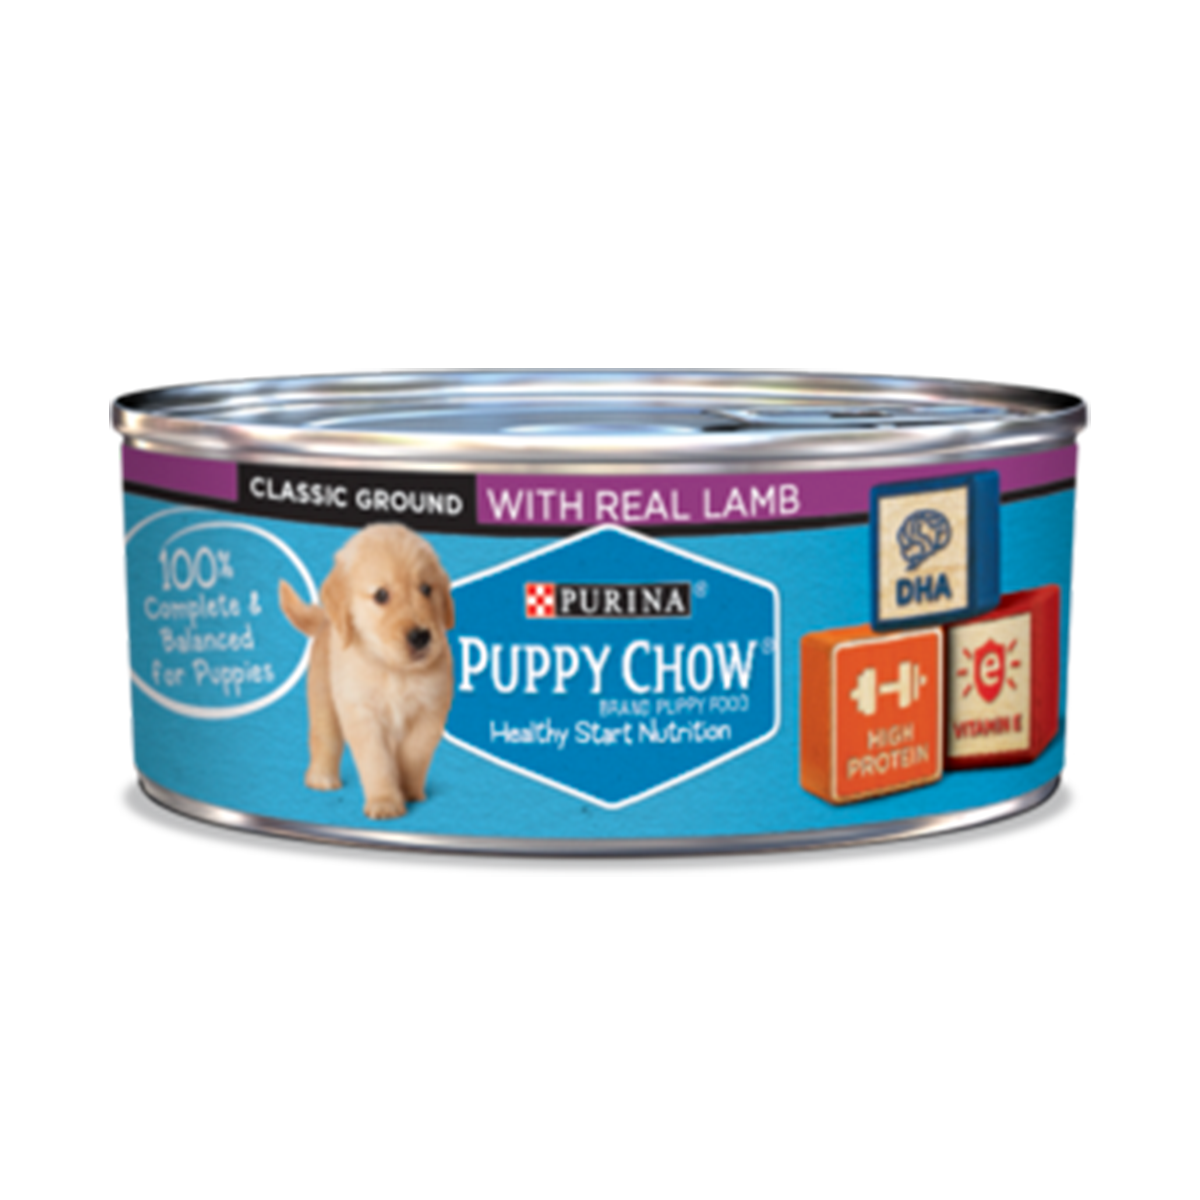 purina-puppy-chow-lamb-wet-puppy-food.png